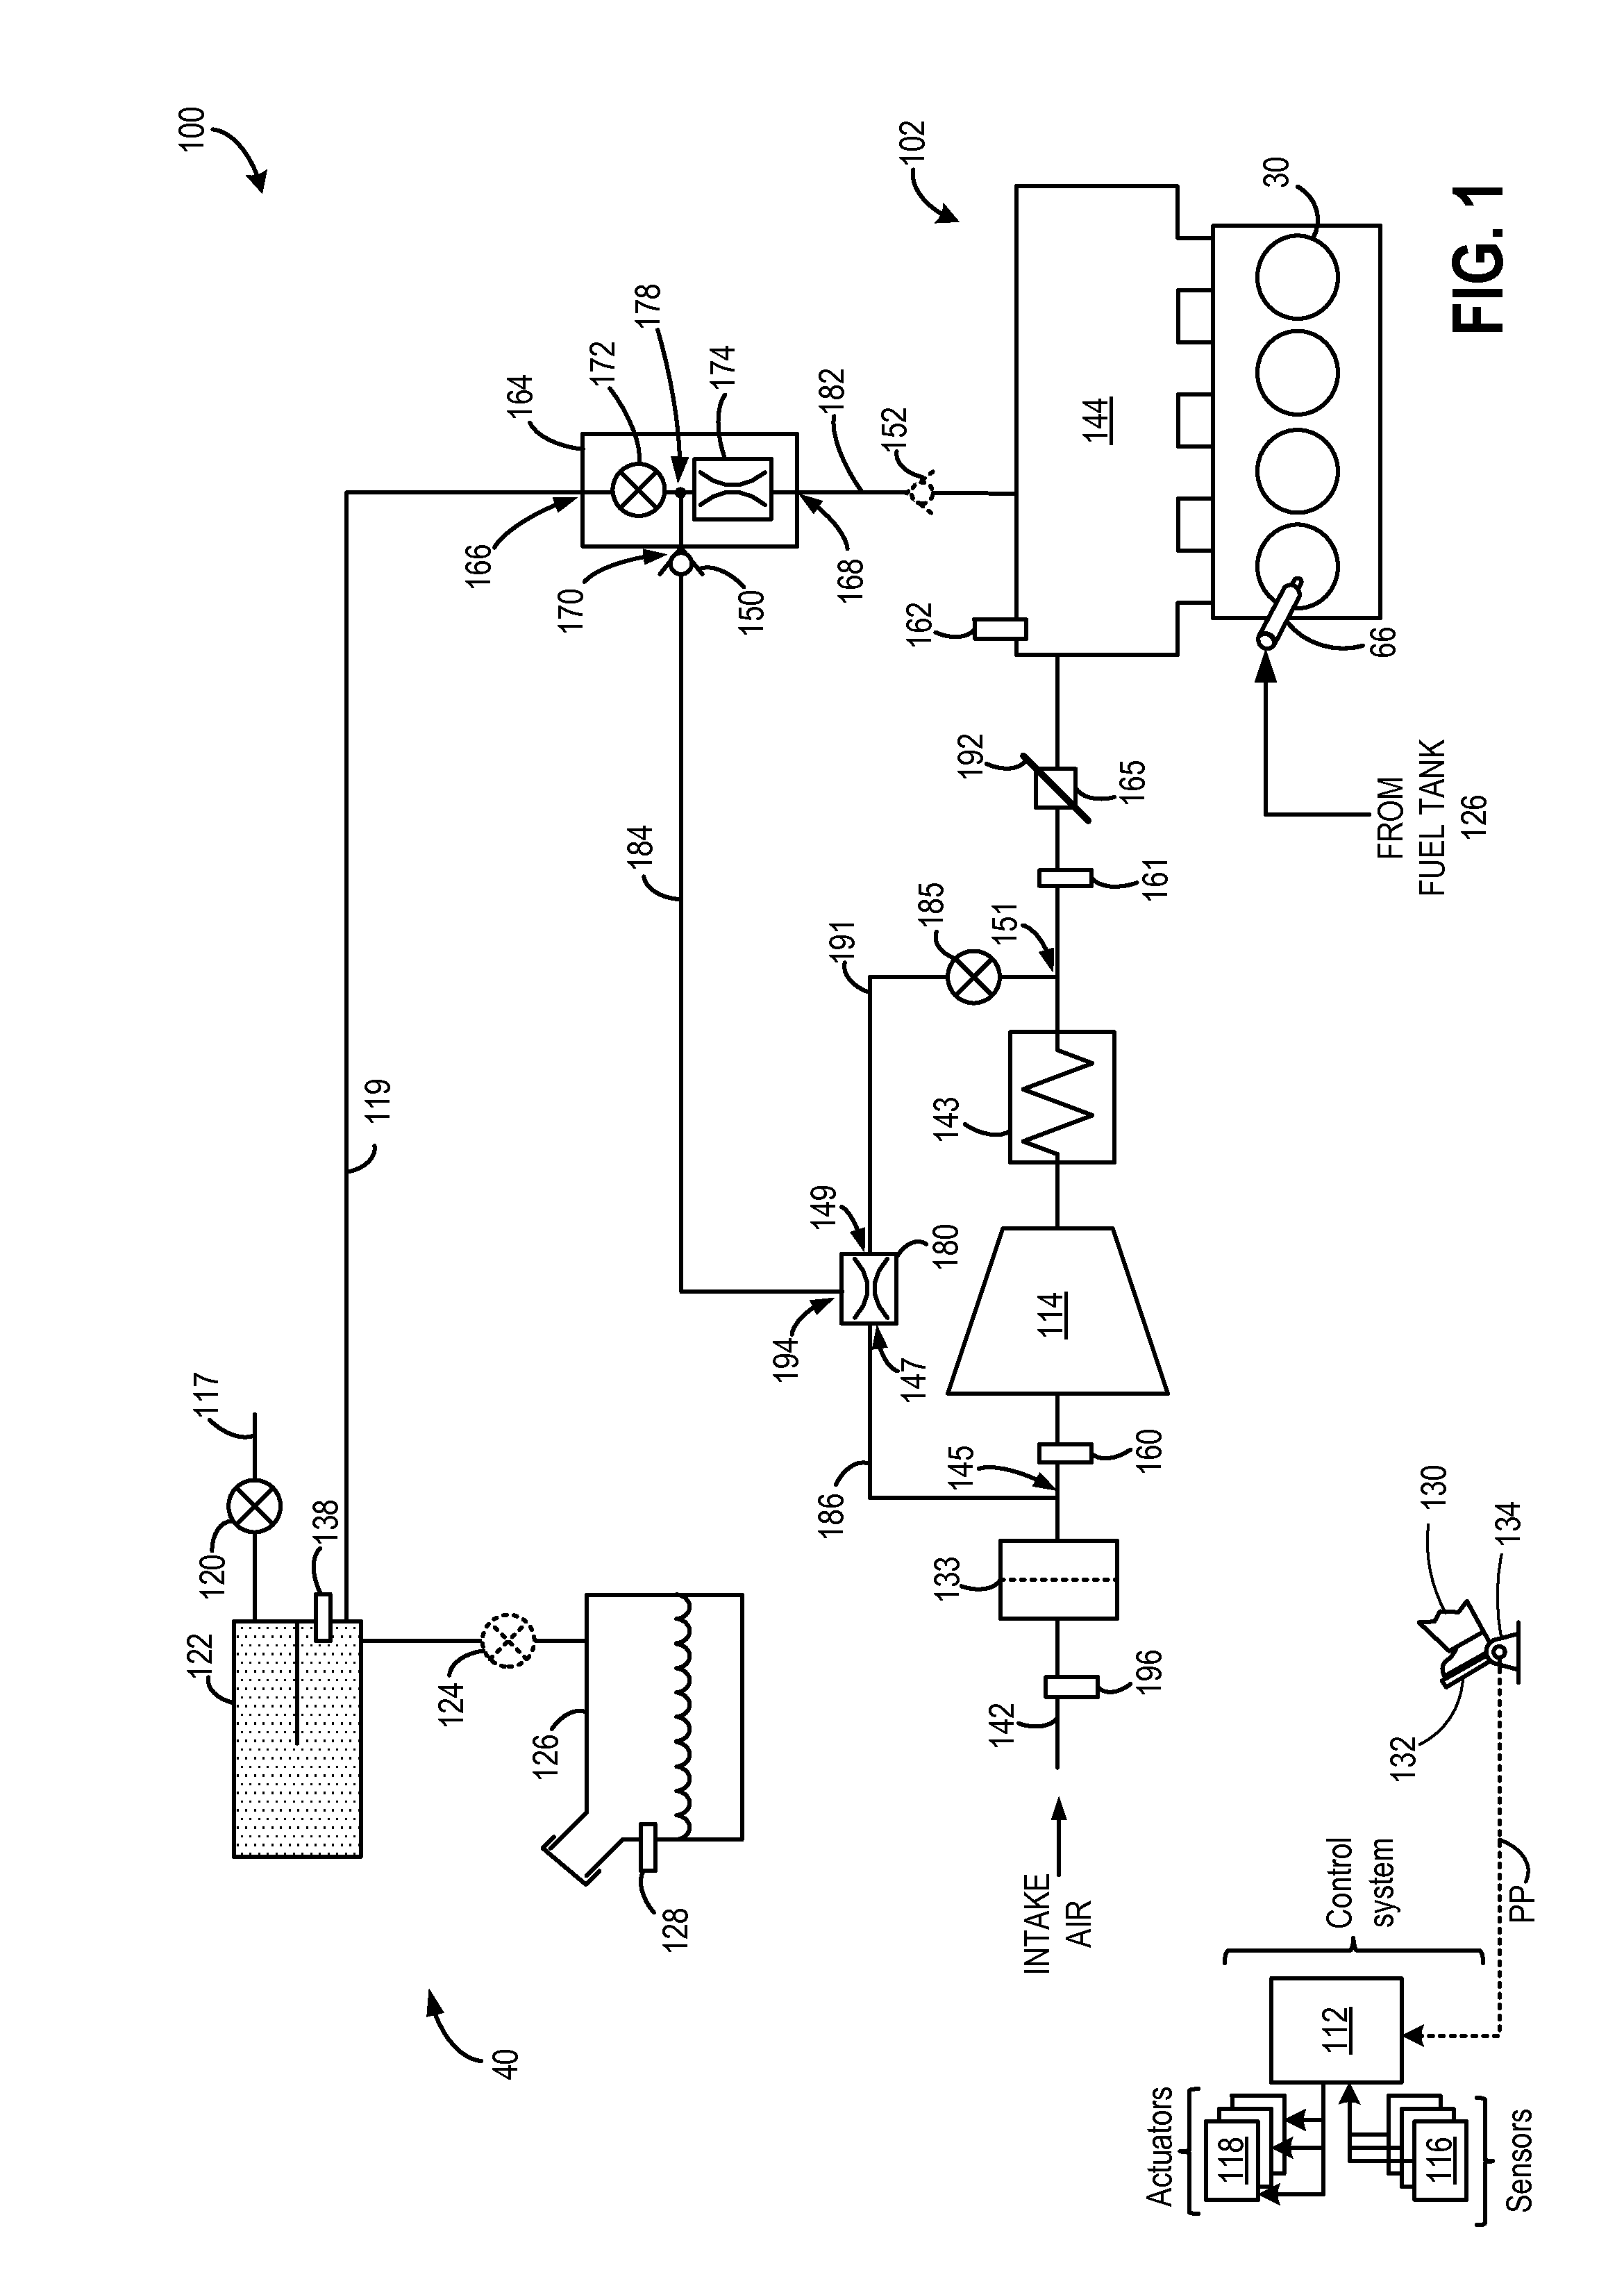 System and method for improving canister purging